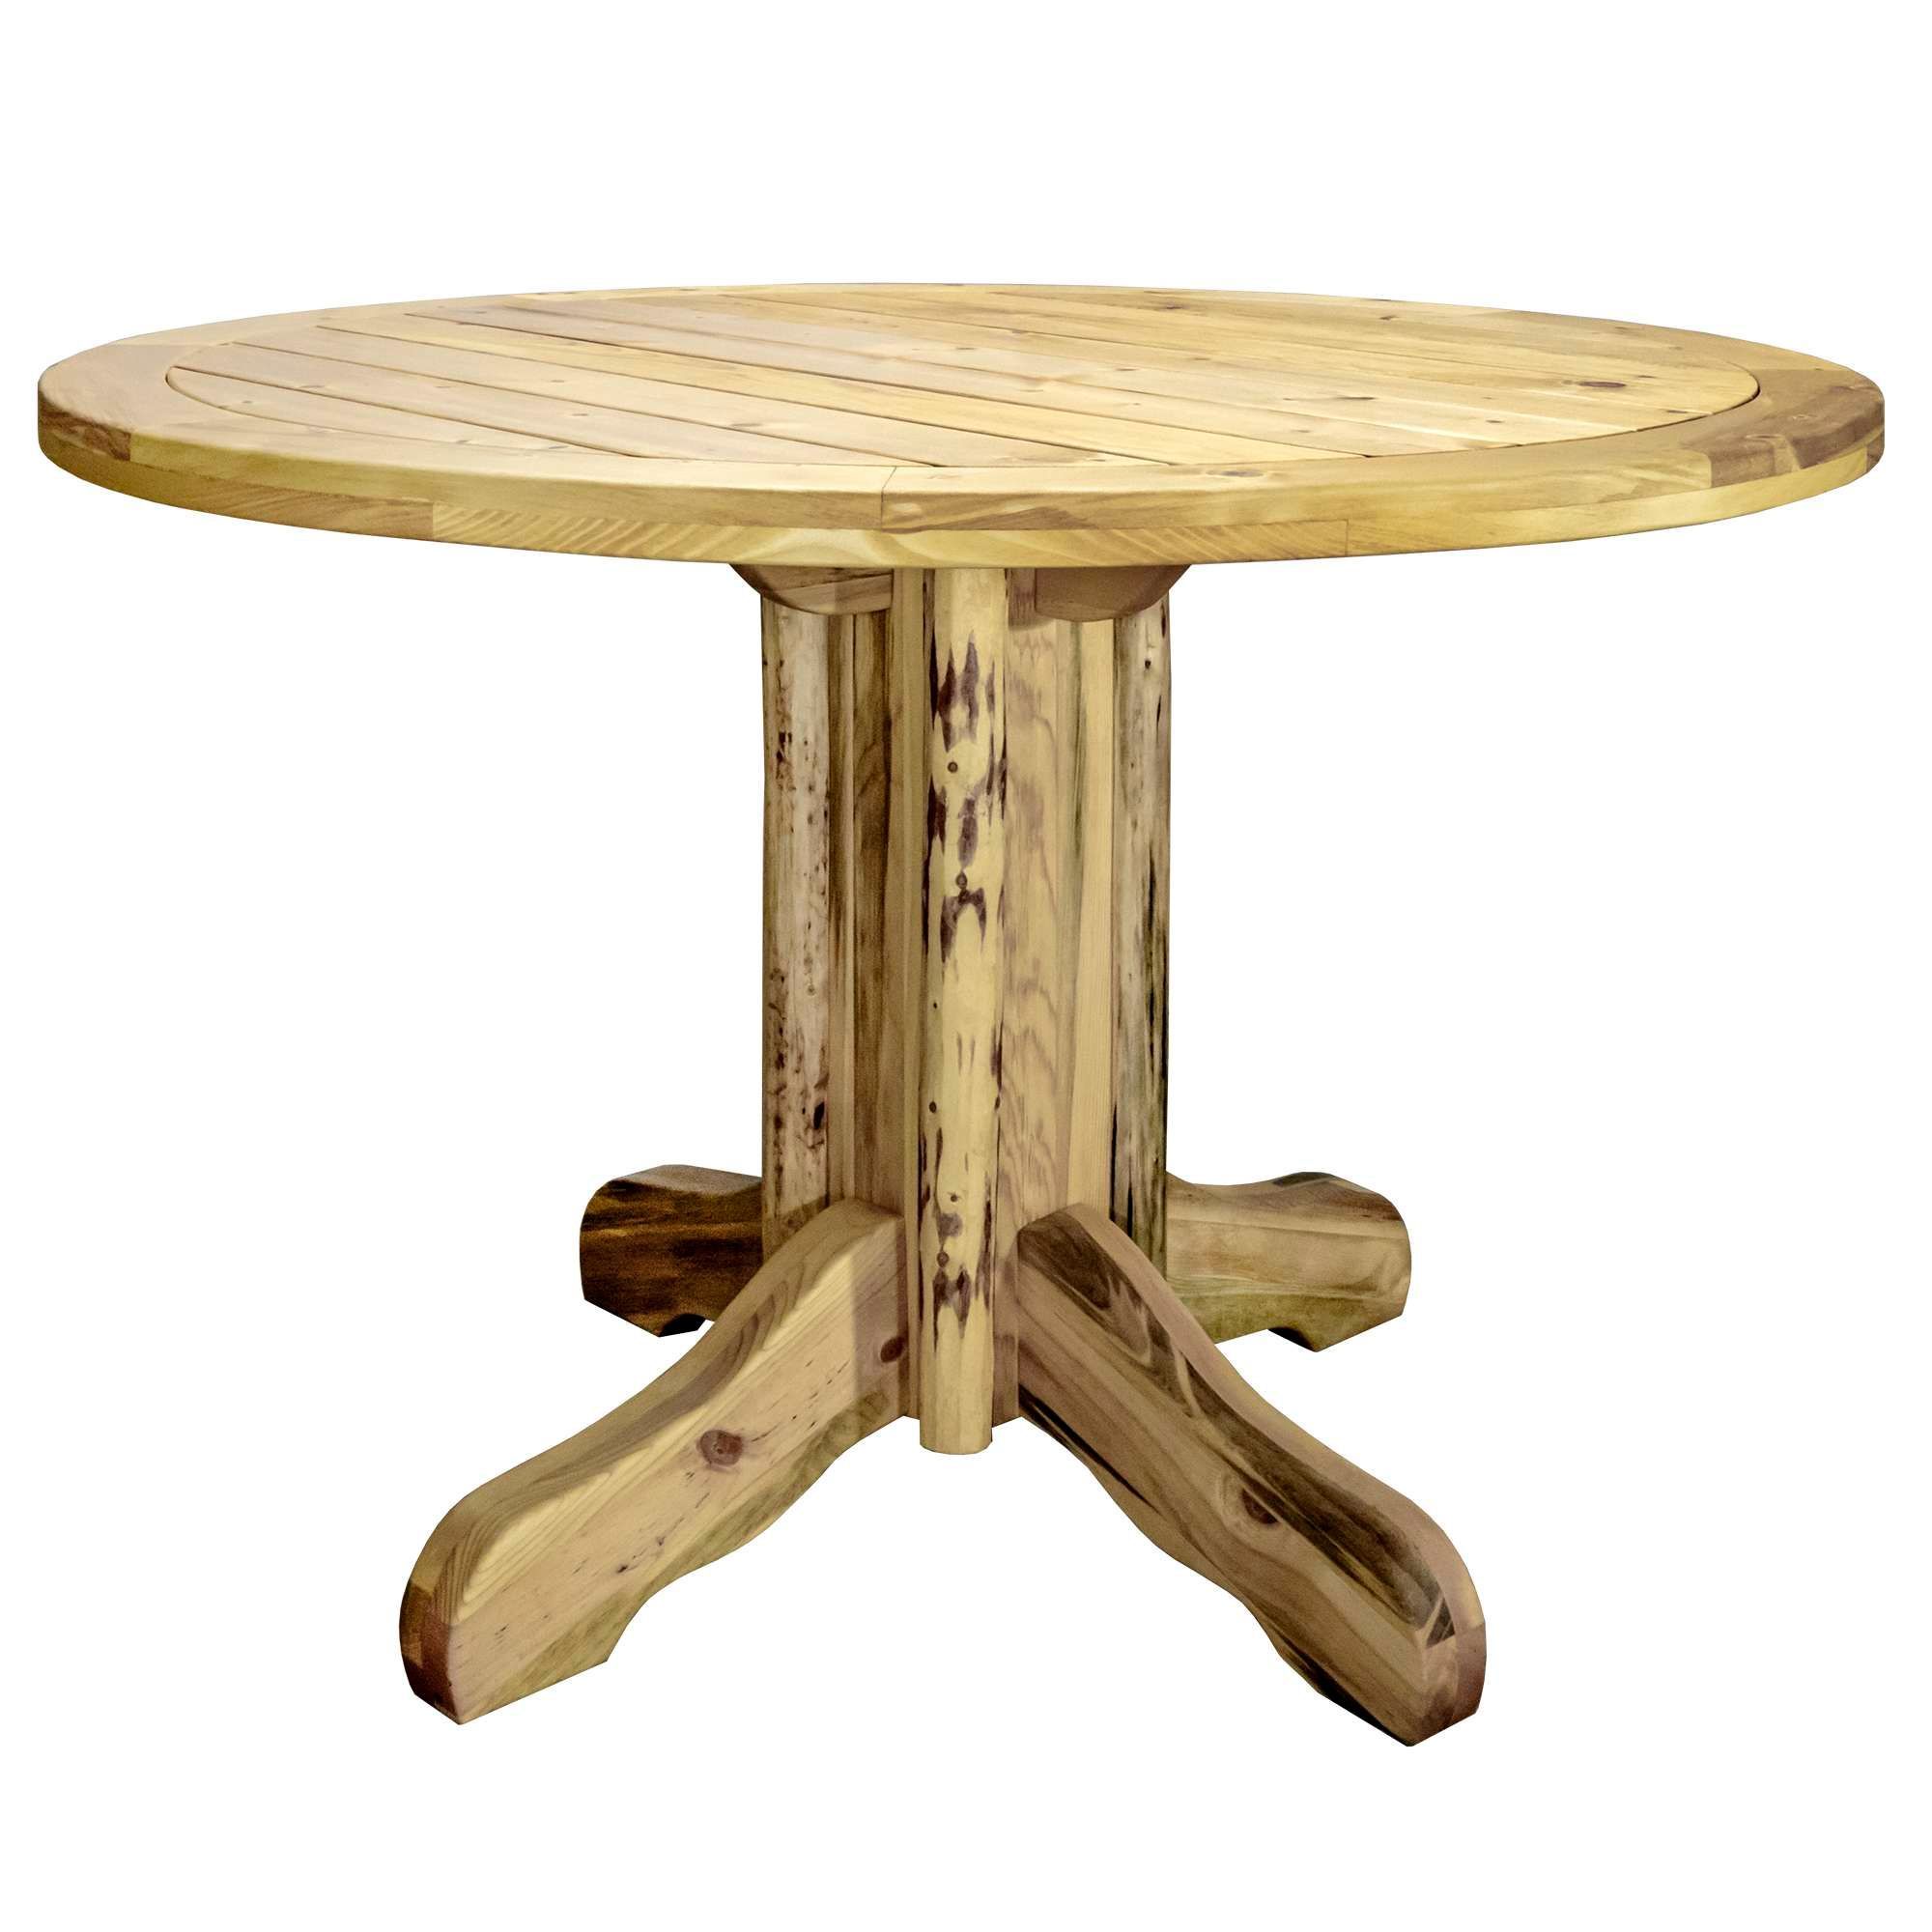 Montana Collection Patio Table, Exterior Finish - image 1 of 5